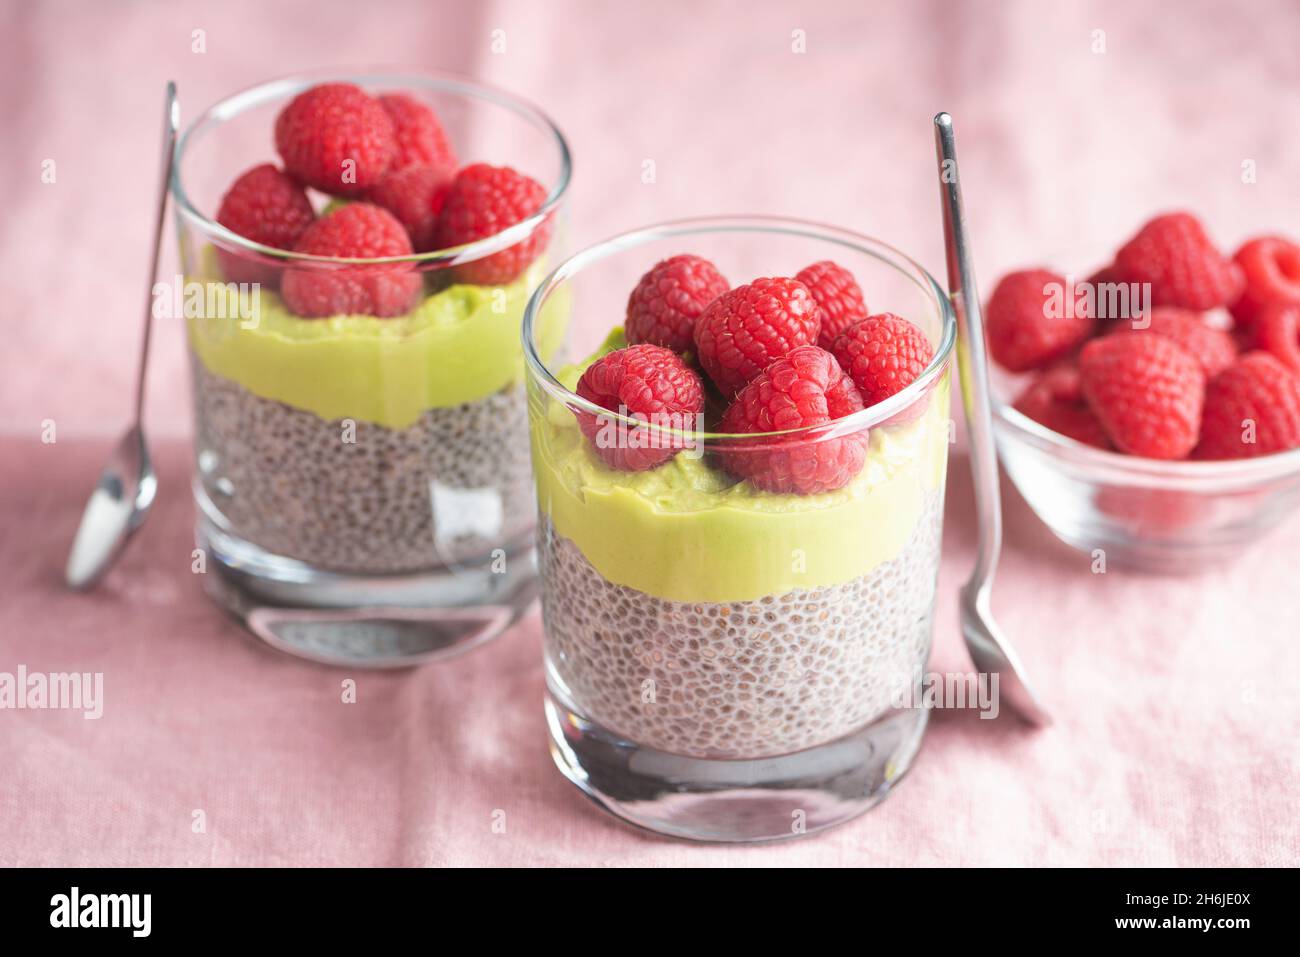 Vegan chia seed pudding with avocado mousse and raspberries in glass jar on pink background Stock Photo